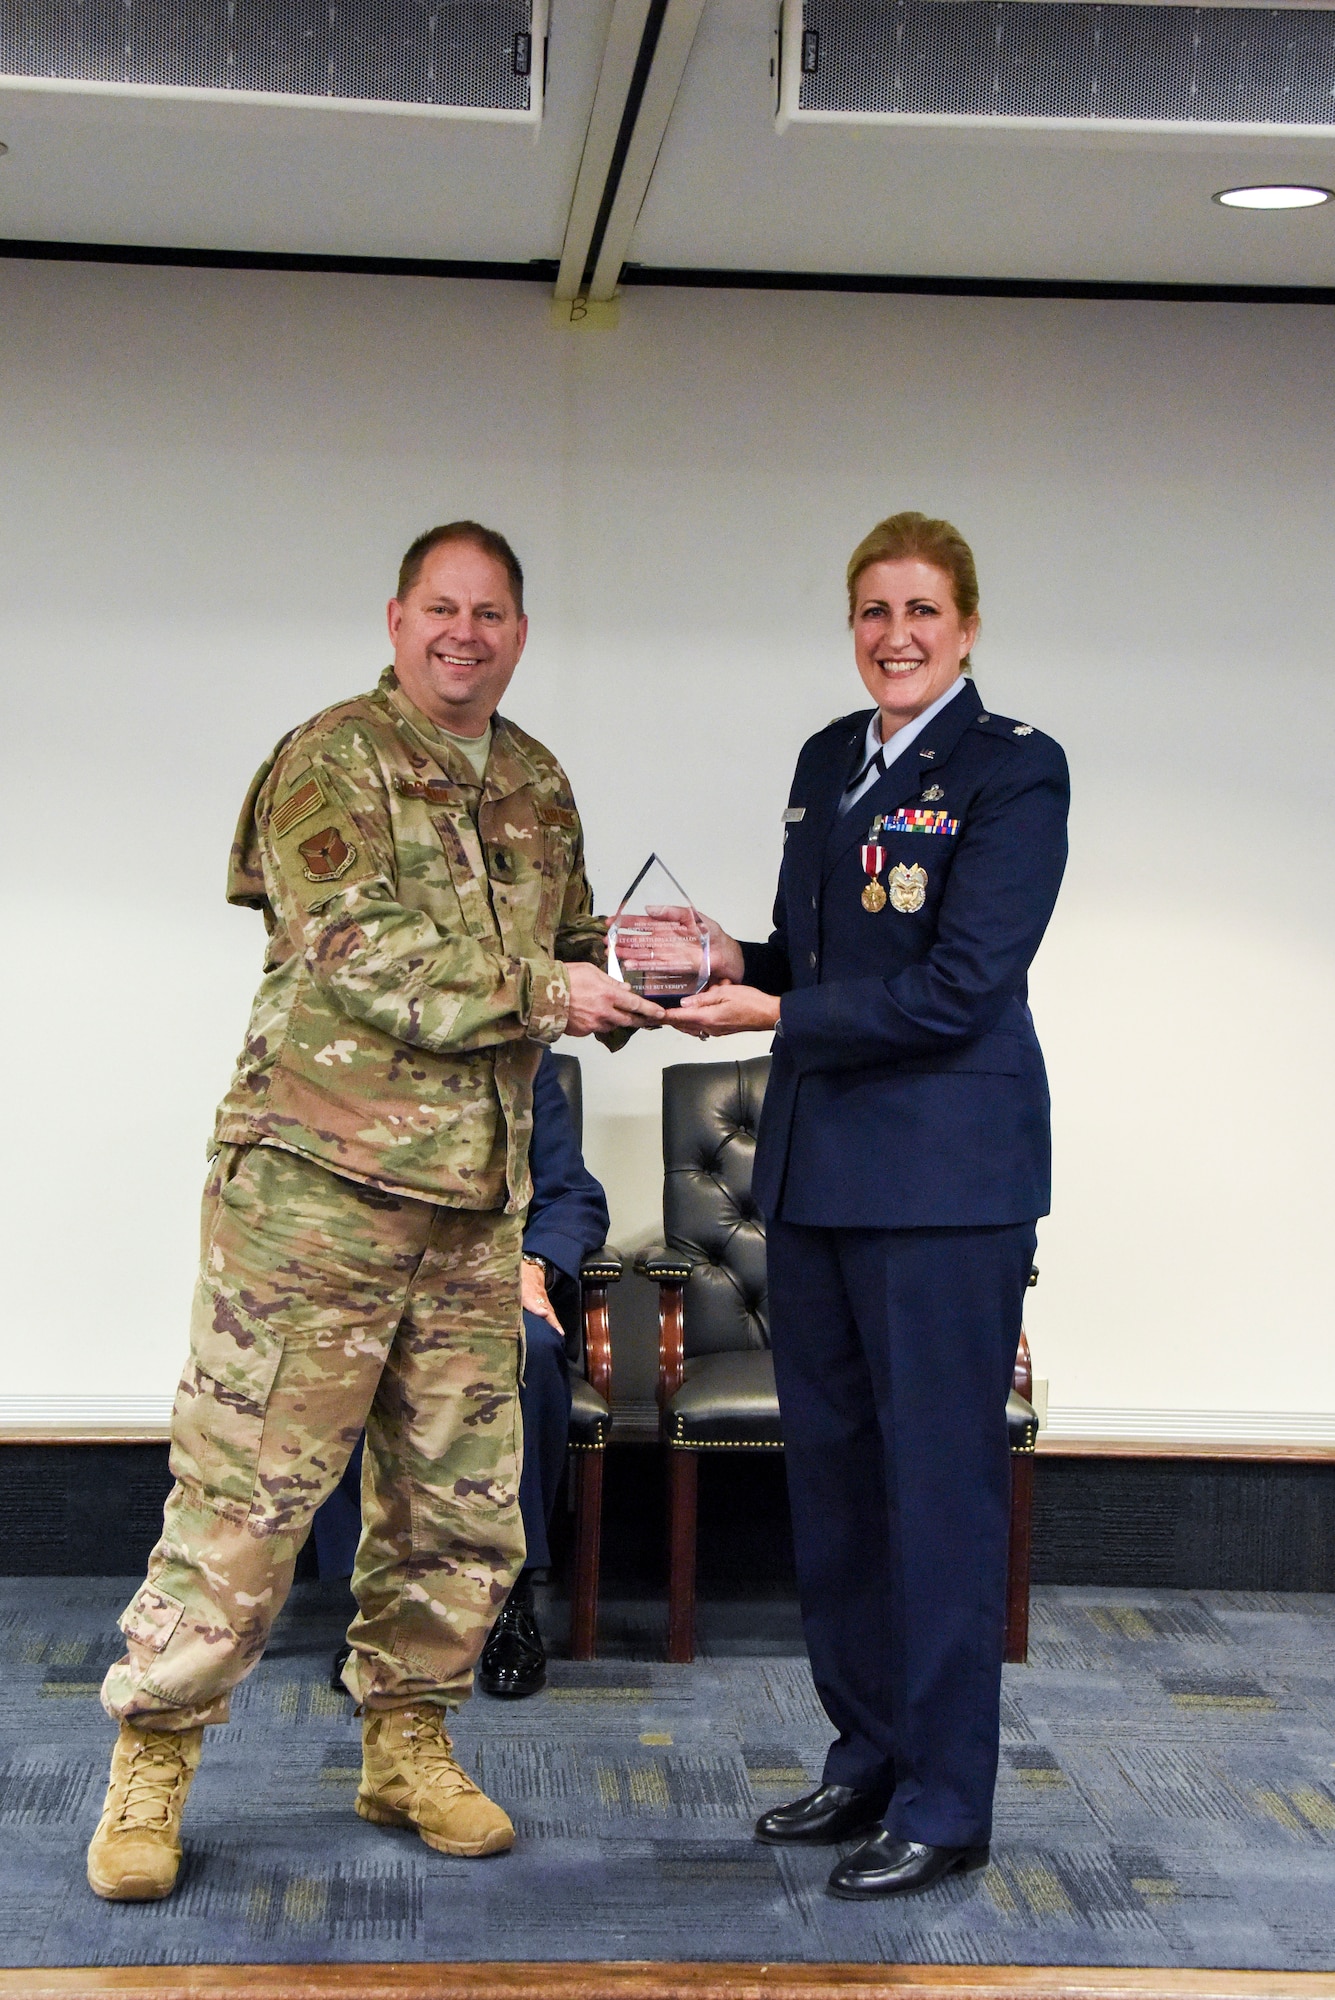 Lt. Col. Beth E. Bruker Walos, right, program administrator with the 911th Airlift Wing Inspector General inspections office, accepts a plaque from Lt. Col. Todd McCrann during her retirement ceremony at the Pittsburgh International Airport Air Reserve Station, Pennsylvania, Nov. 2, 2019.